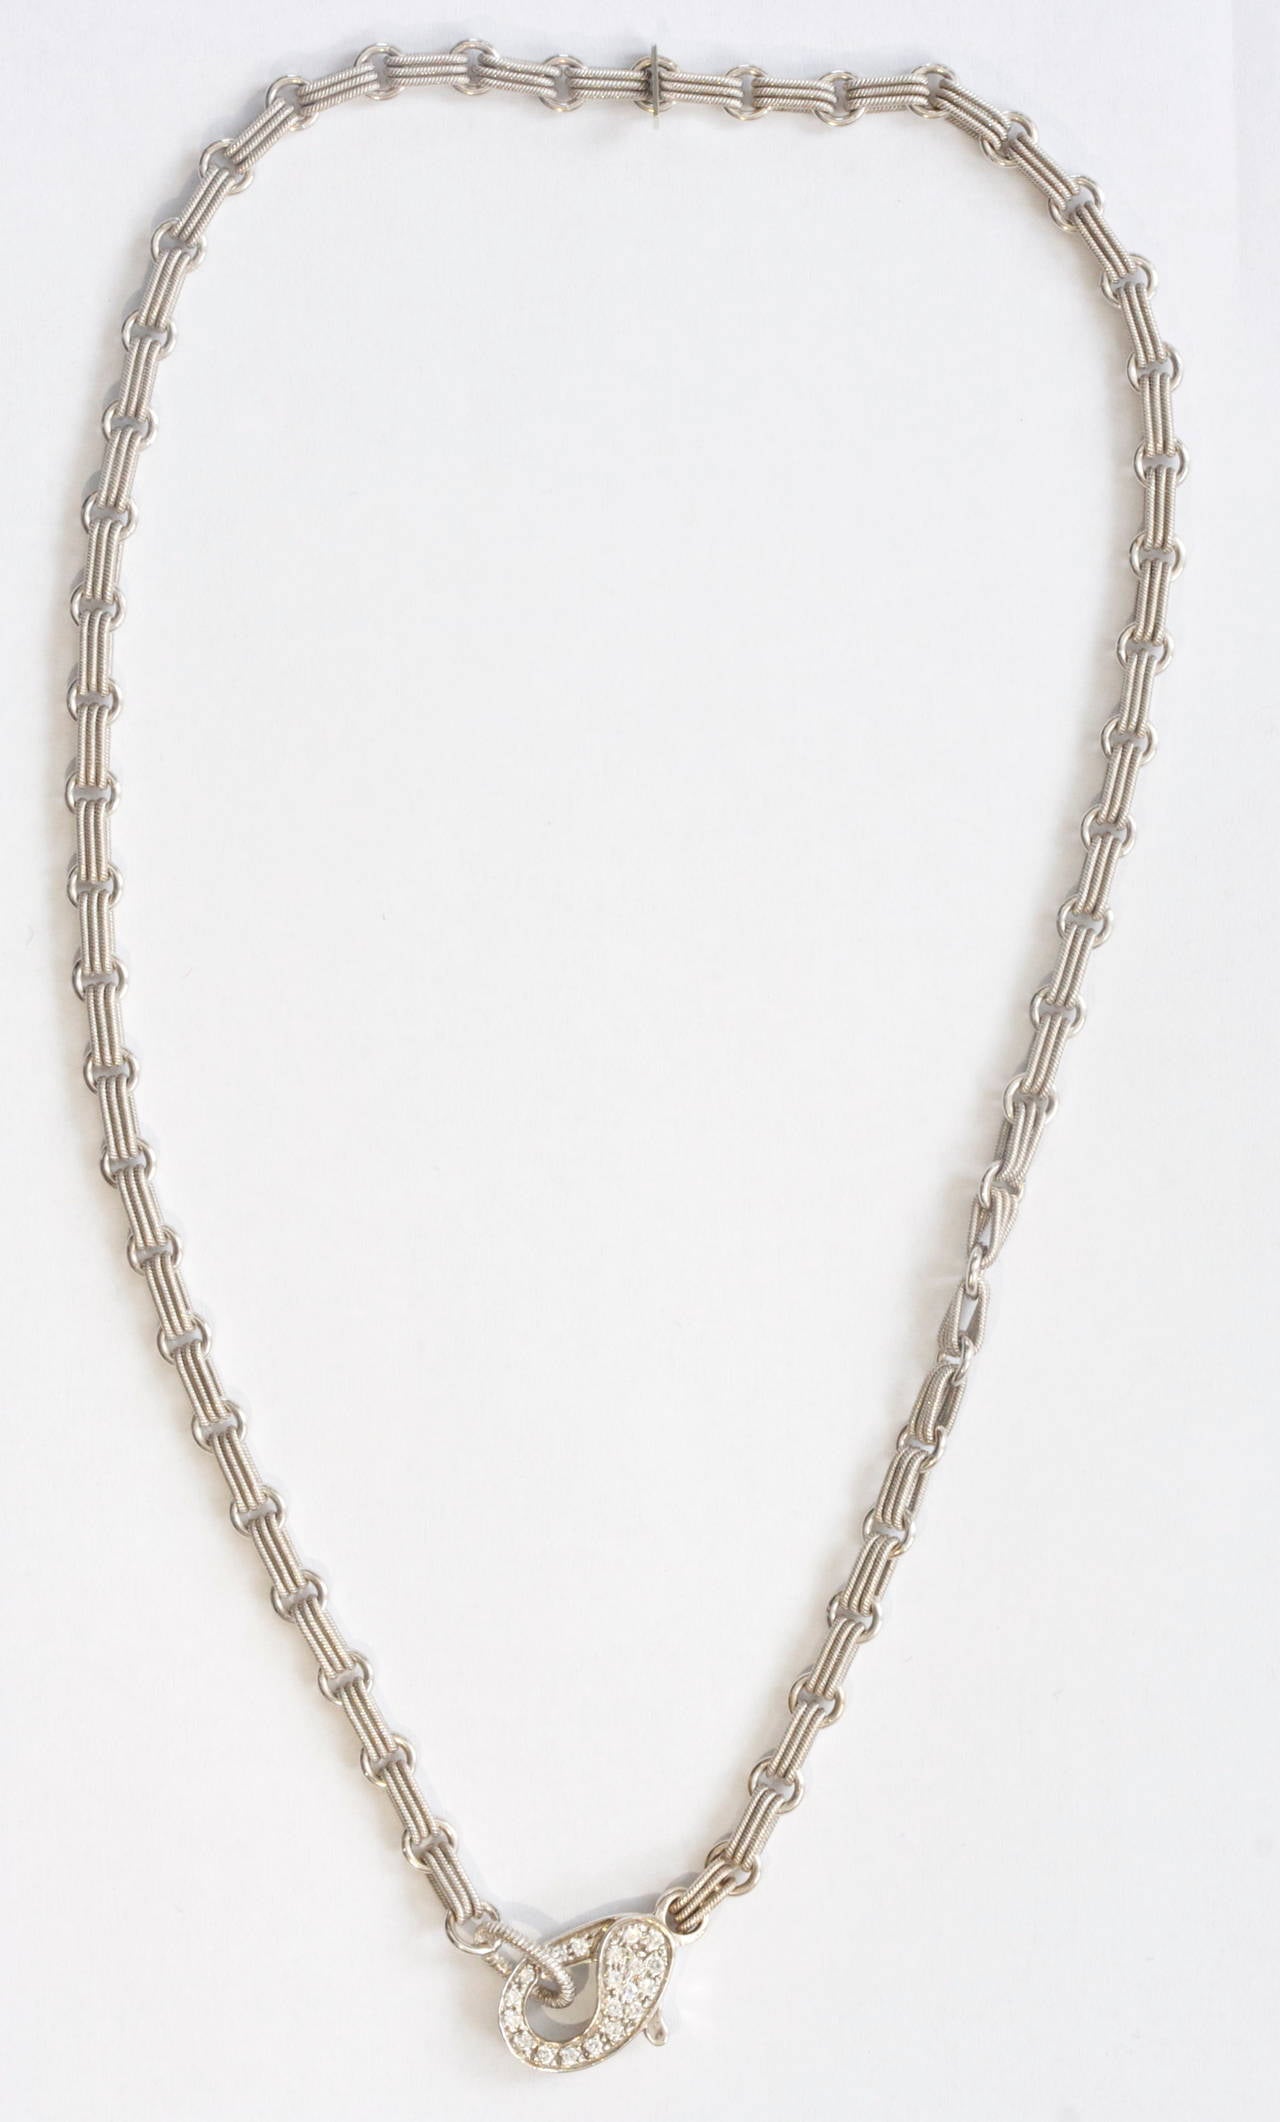 Pepi is a jewelry designer in Beverly Hills and has a store on Robertson Blvd. She has creatively linked this necklace with 2 different circular shapes to make a simple yet eye pleasing piece of jewelry. The lobster blast has been covered with pave